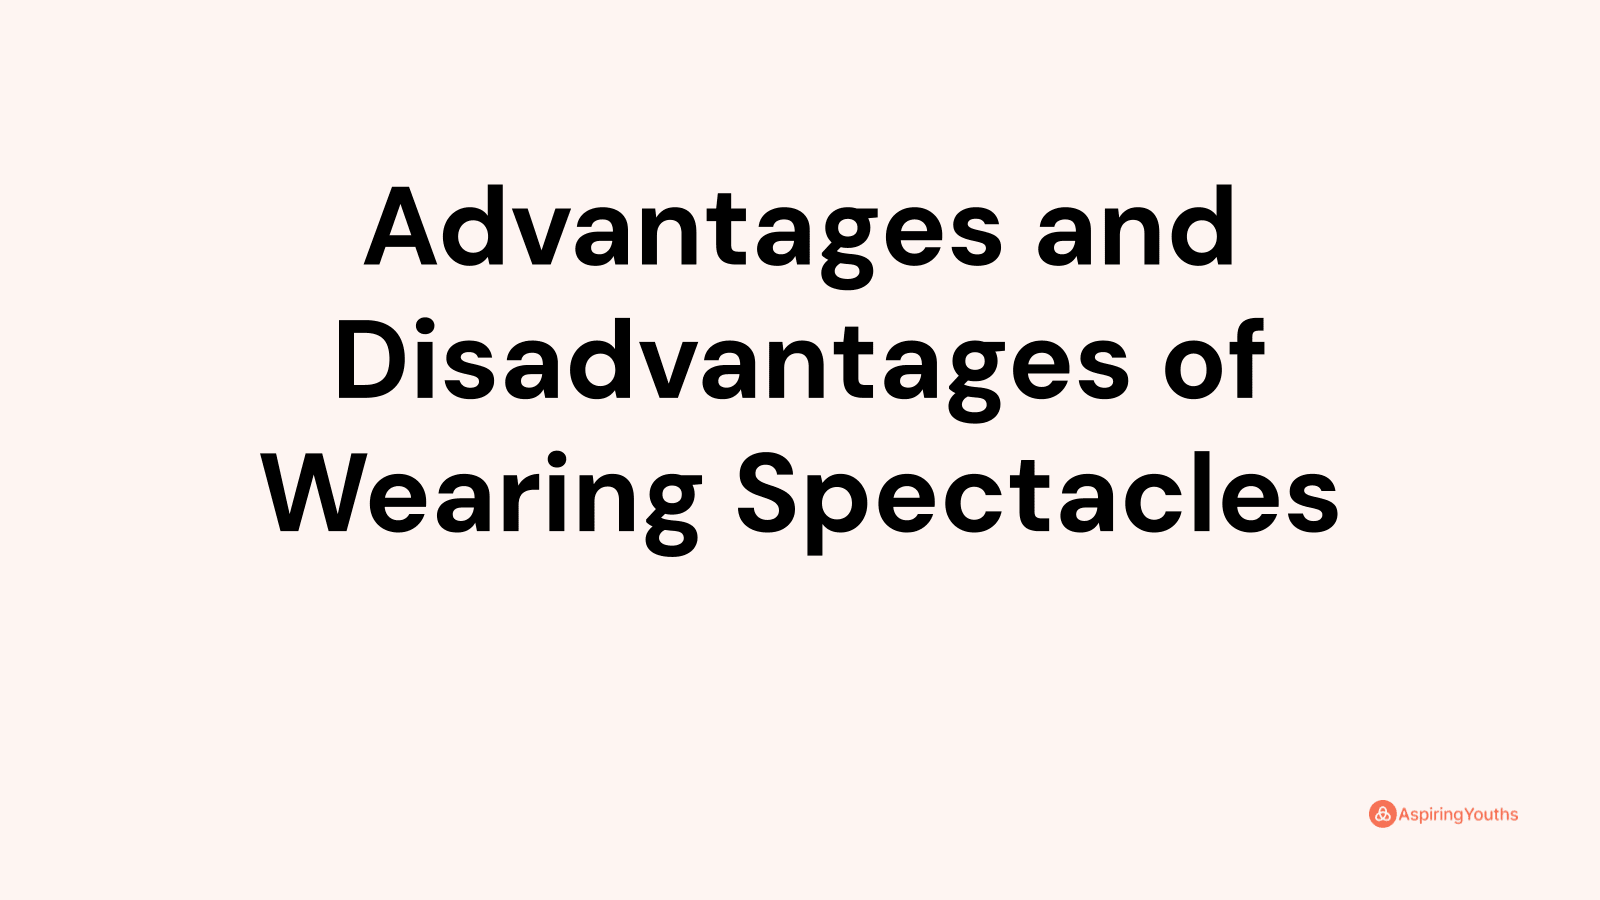 Advantages and disadvantages of Wearing Spectacles